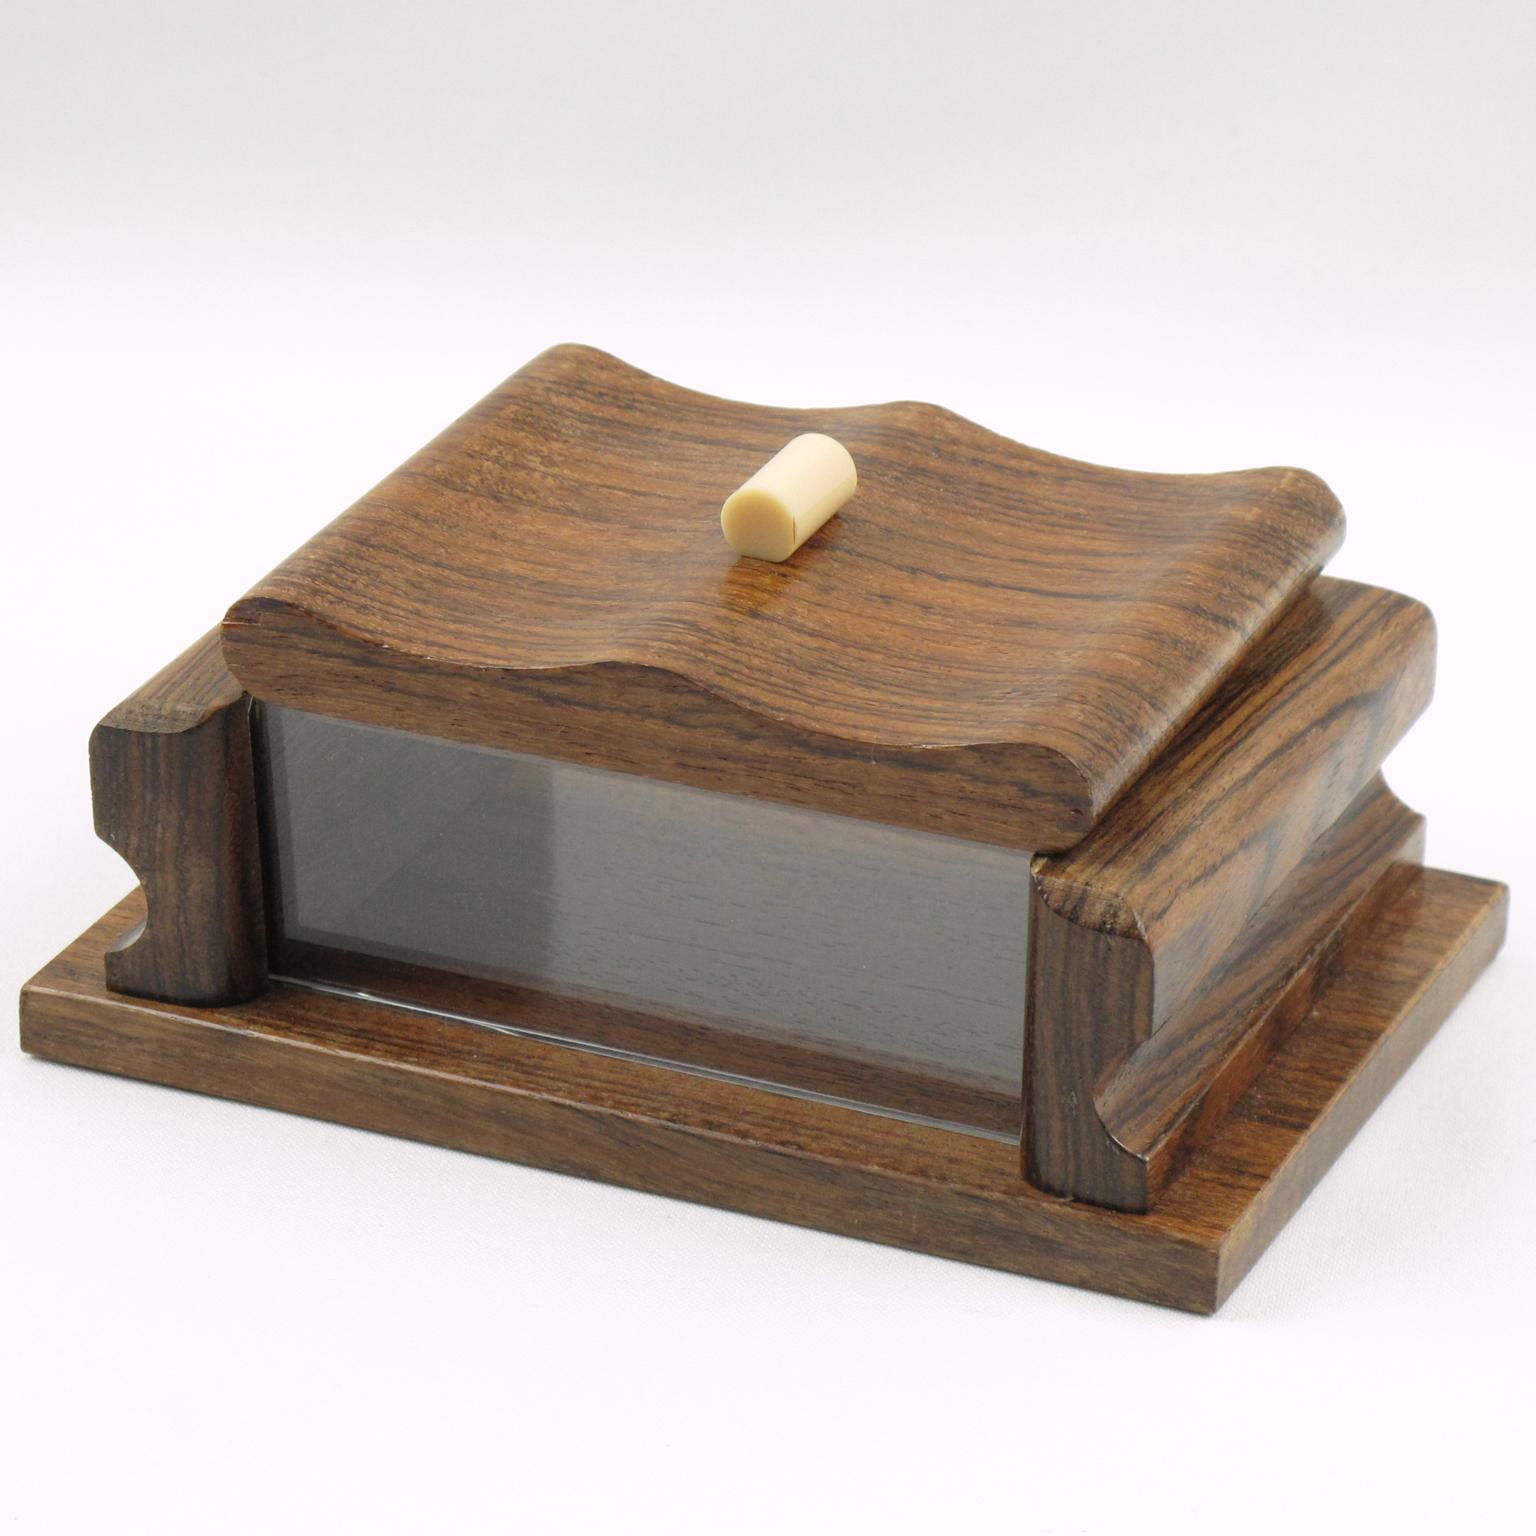 French Art Deco Wood and Lucite Box, 1940s For Sale